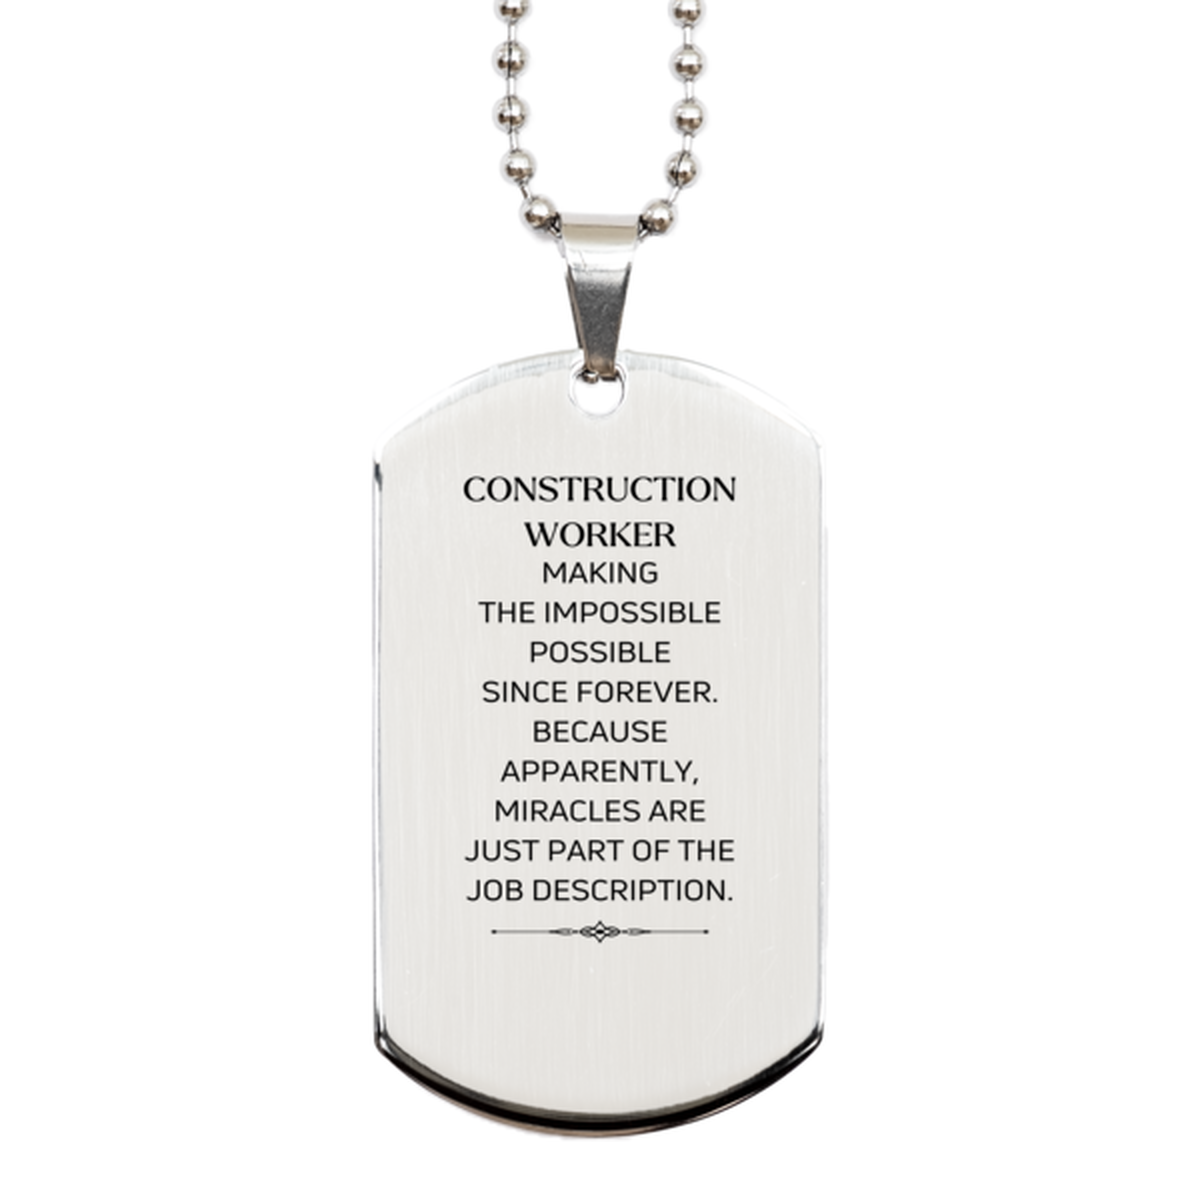 Funny Construction Worker Gifts, Miracles are just part of the job description, Inspirational Birthday Silver Dog Tag For Construction Worker, Men, Women, Coworkers, Friends, Boss